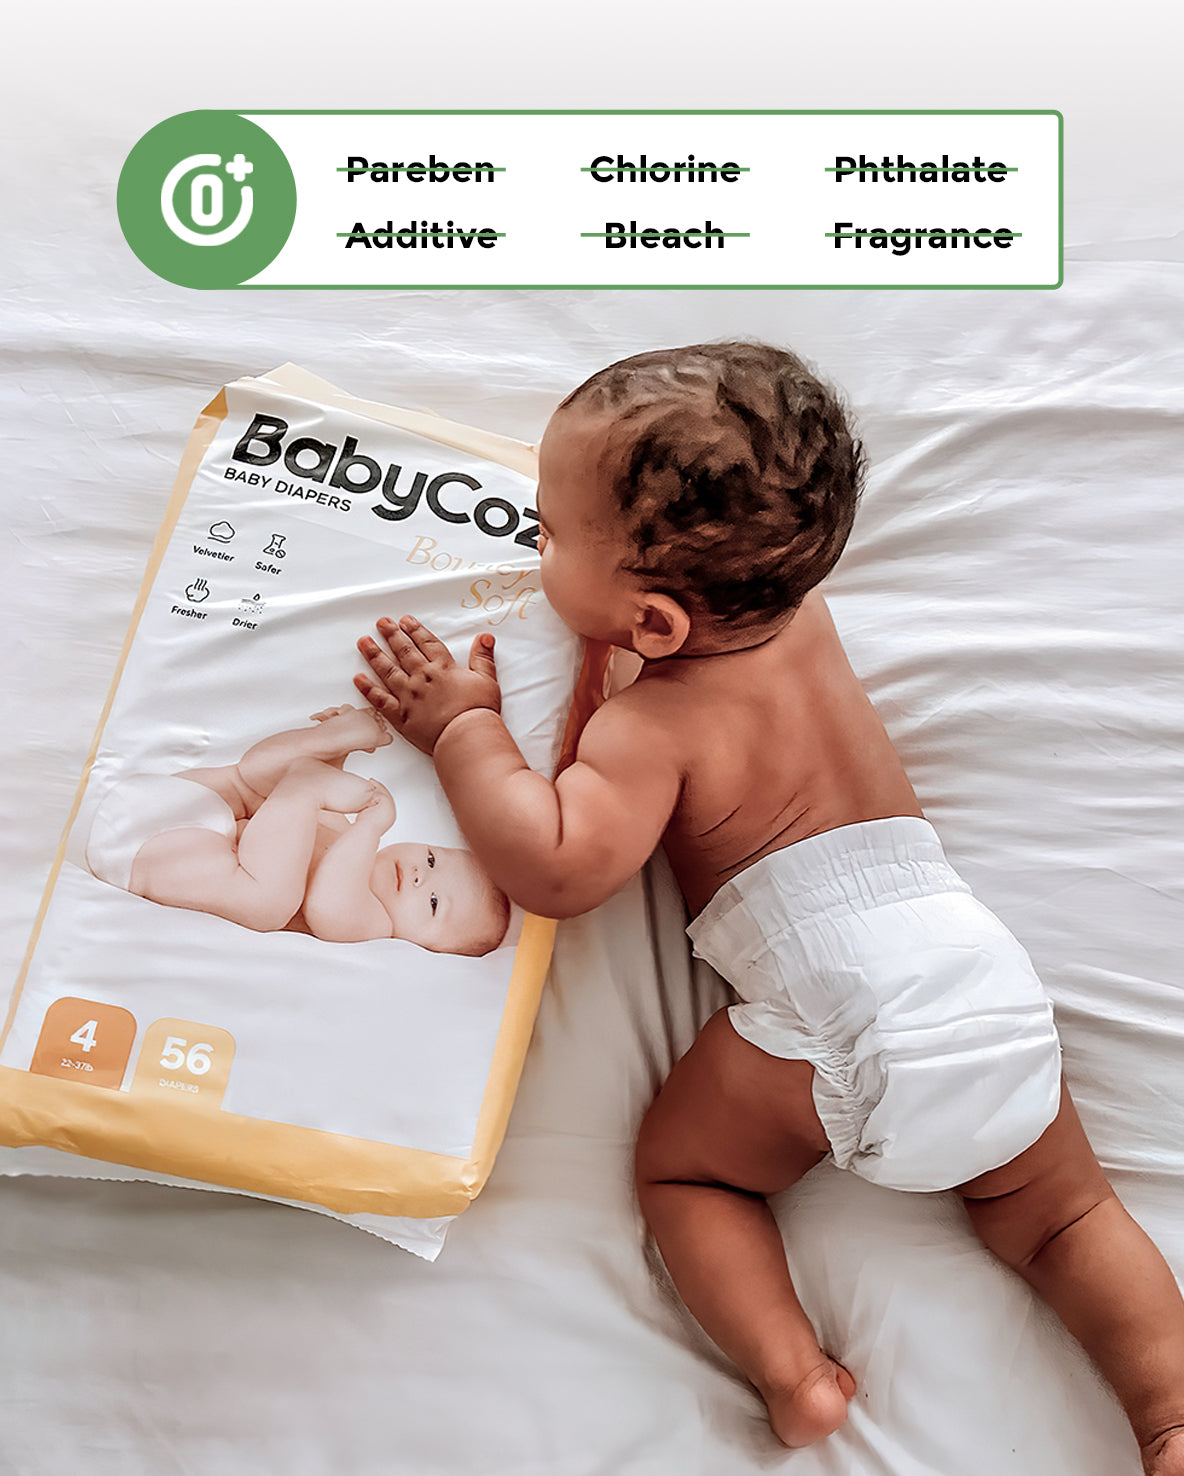 BabyCozy "Bouncy Soft" Diapers For Newborns